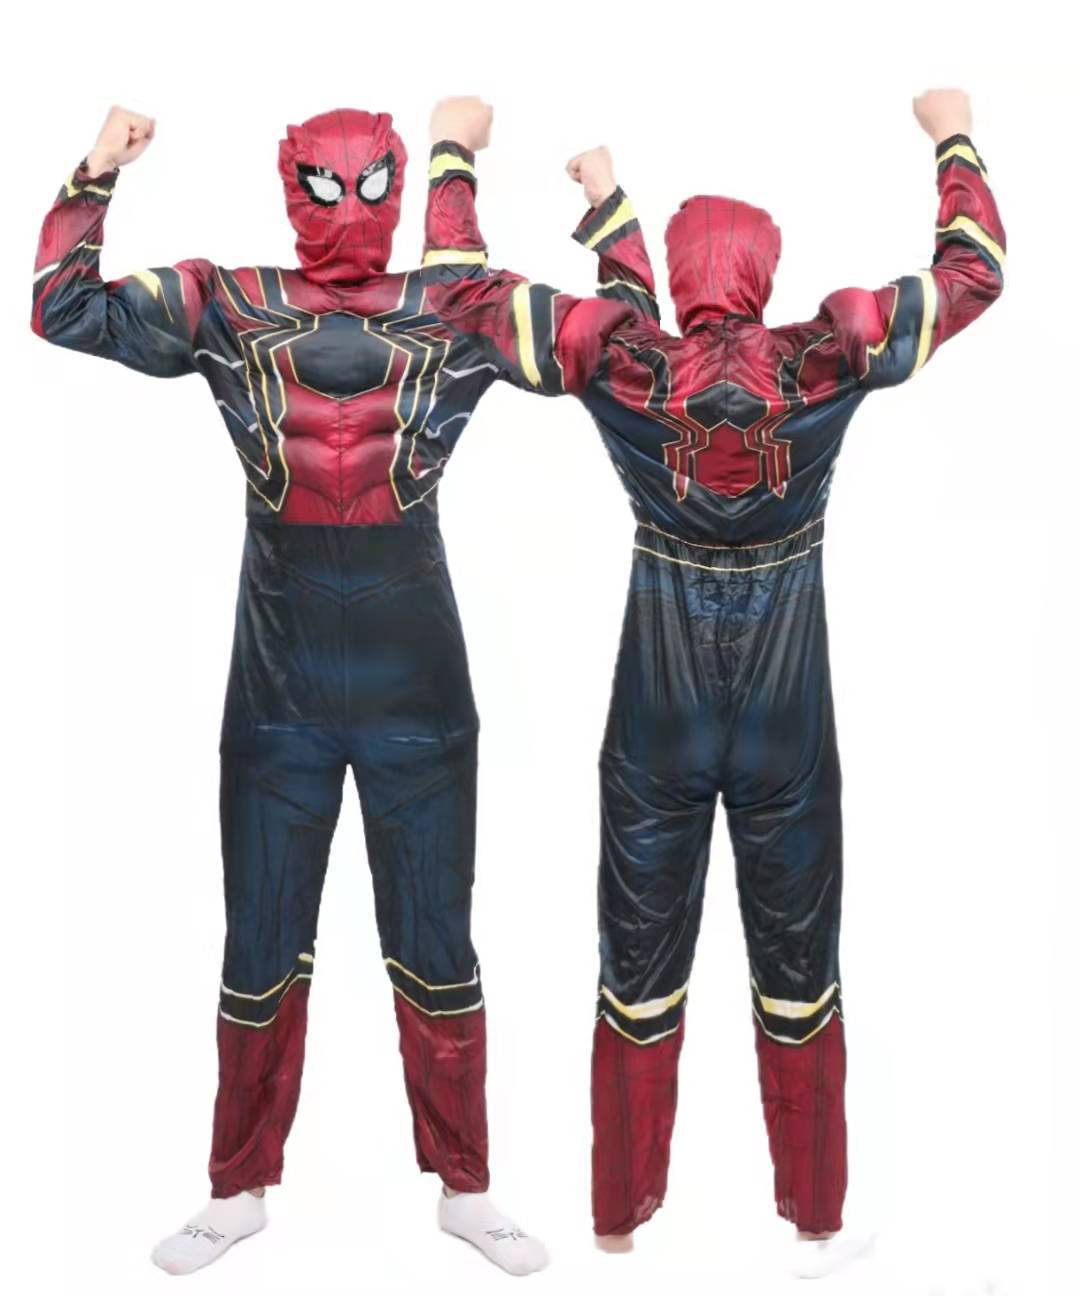 Avengers Iron Spiderman Cosplay Costumes Boys Superhero Muscle Jumpsuits Onesize Outfit